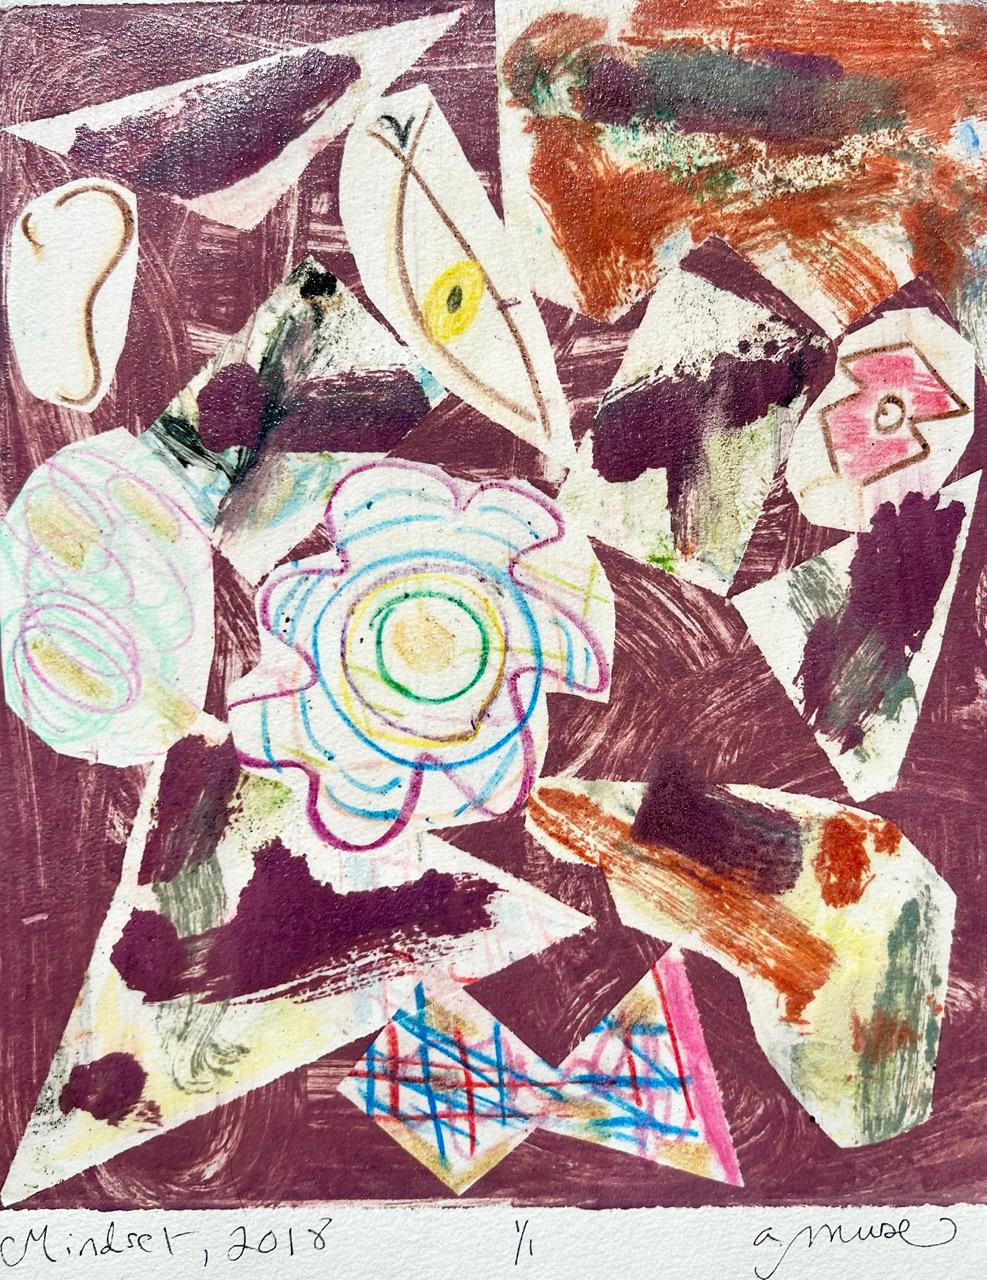 Mindset, Edition of One Work on Paper - Painting by a.muse